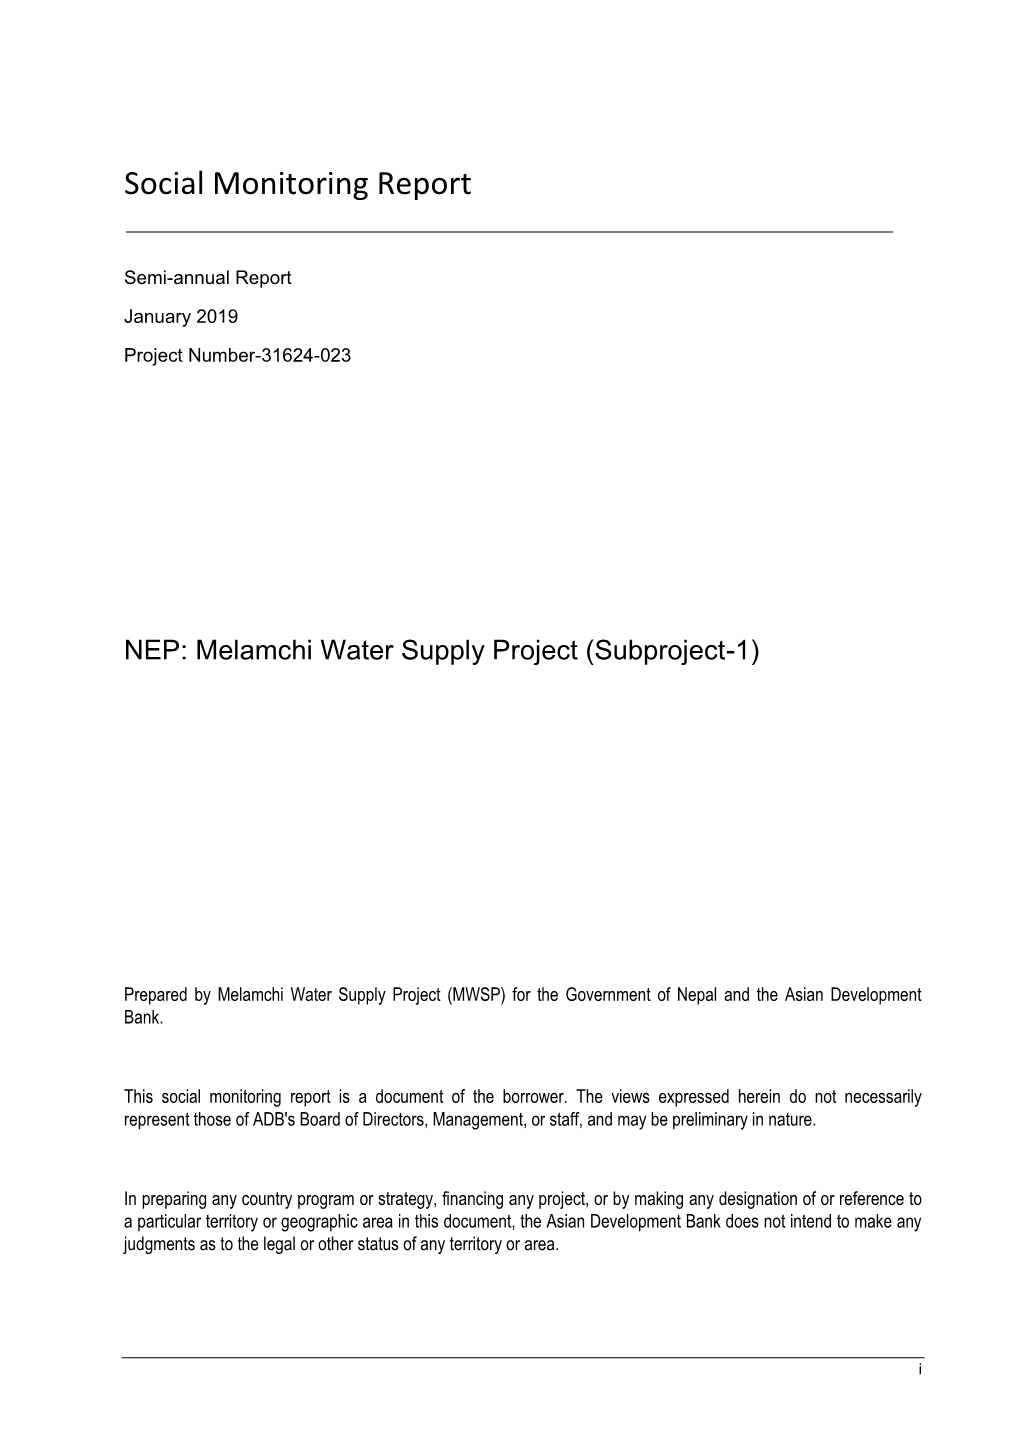 Melamchi Water Supply Project: Subproject 1 Social Monitoring Report